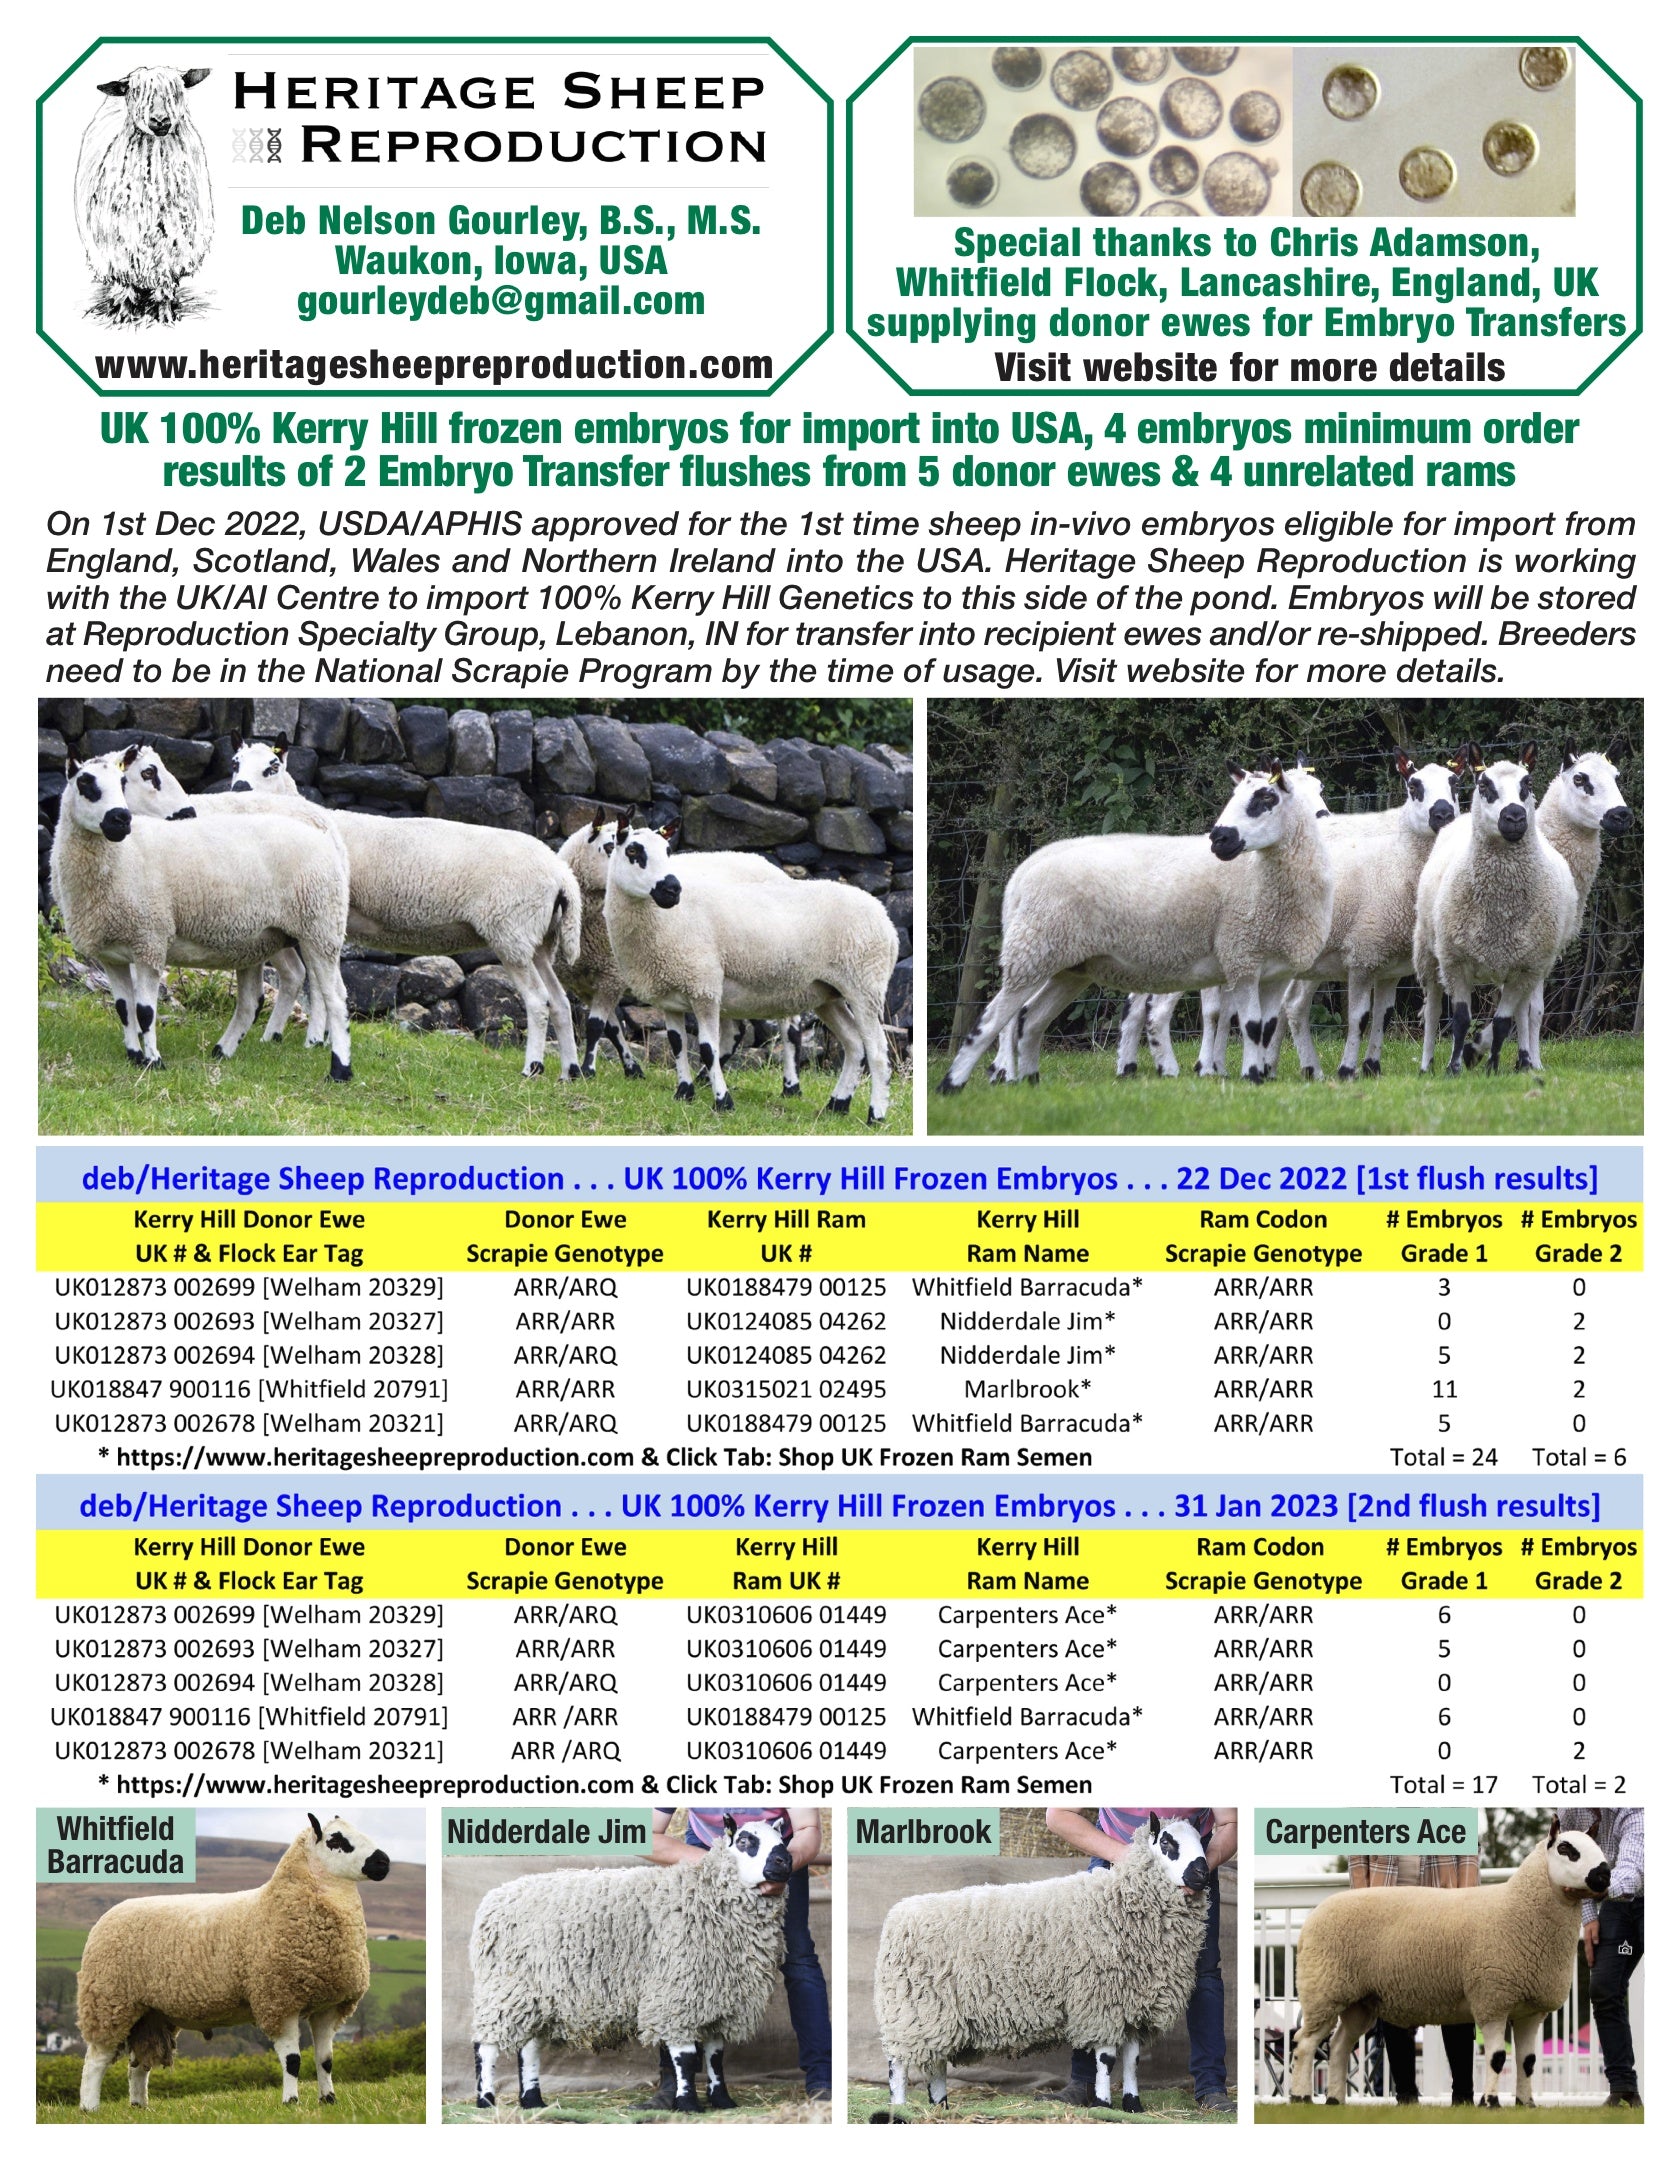 Kerry Hill 100% UK Embryos from 5 Donor Ewes & 4 Rams - Tank #6 - Embryos Imported into USA - SOLD OUT